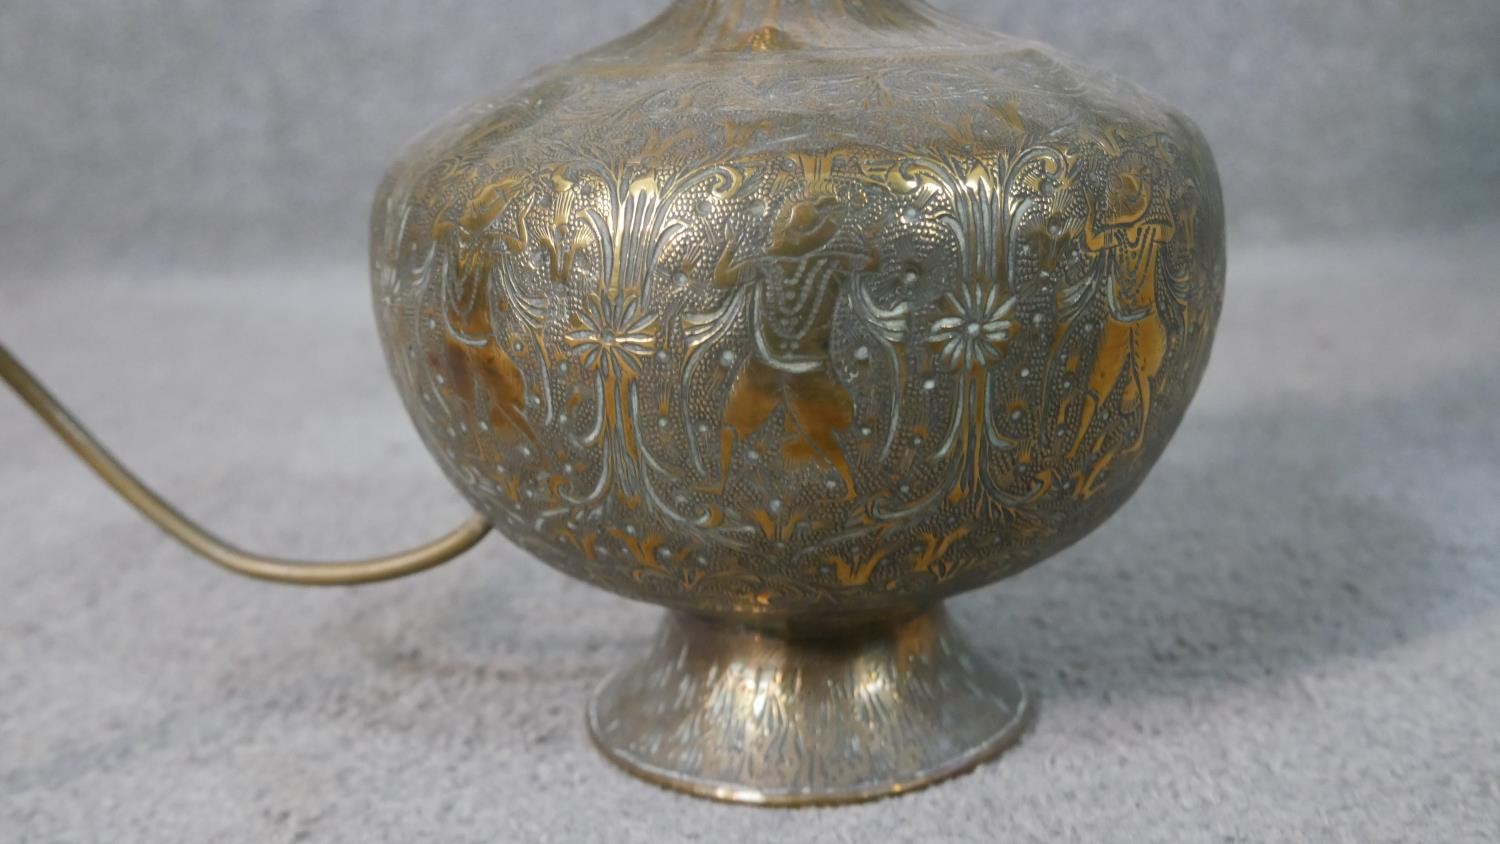 A pair of Indian engraved brass vases converted into table lamps, each with a figural design. H.60cm - Image 9 of 10